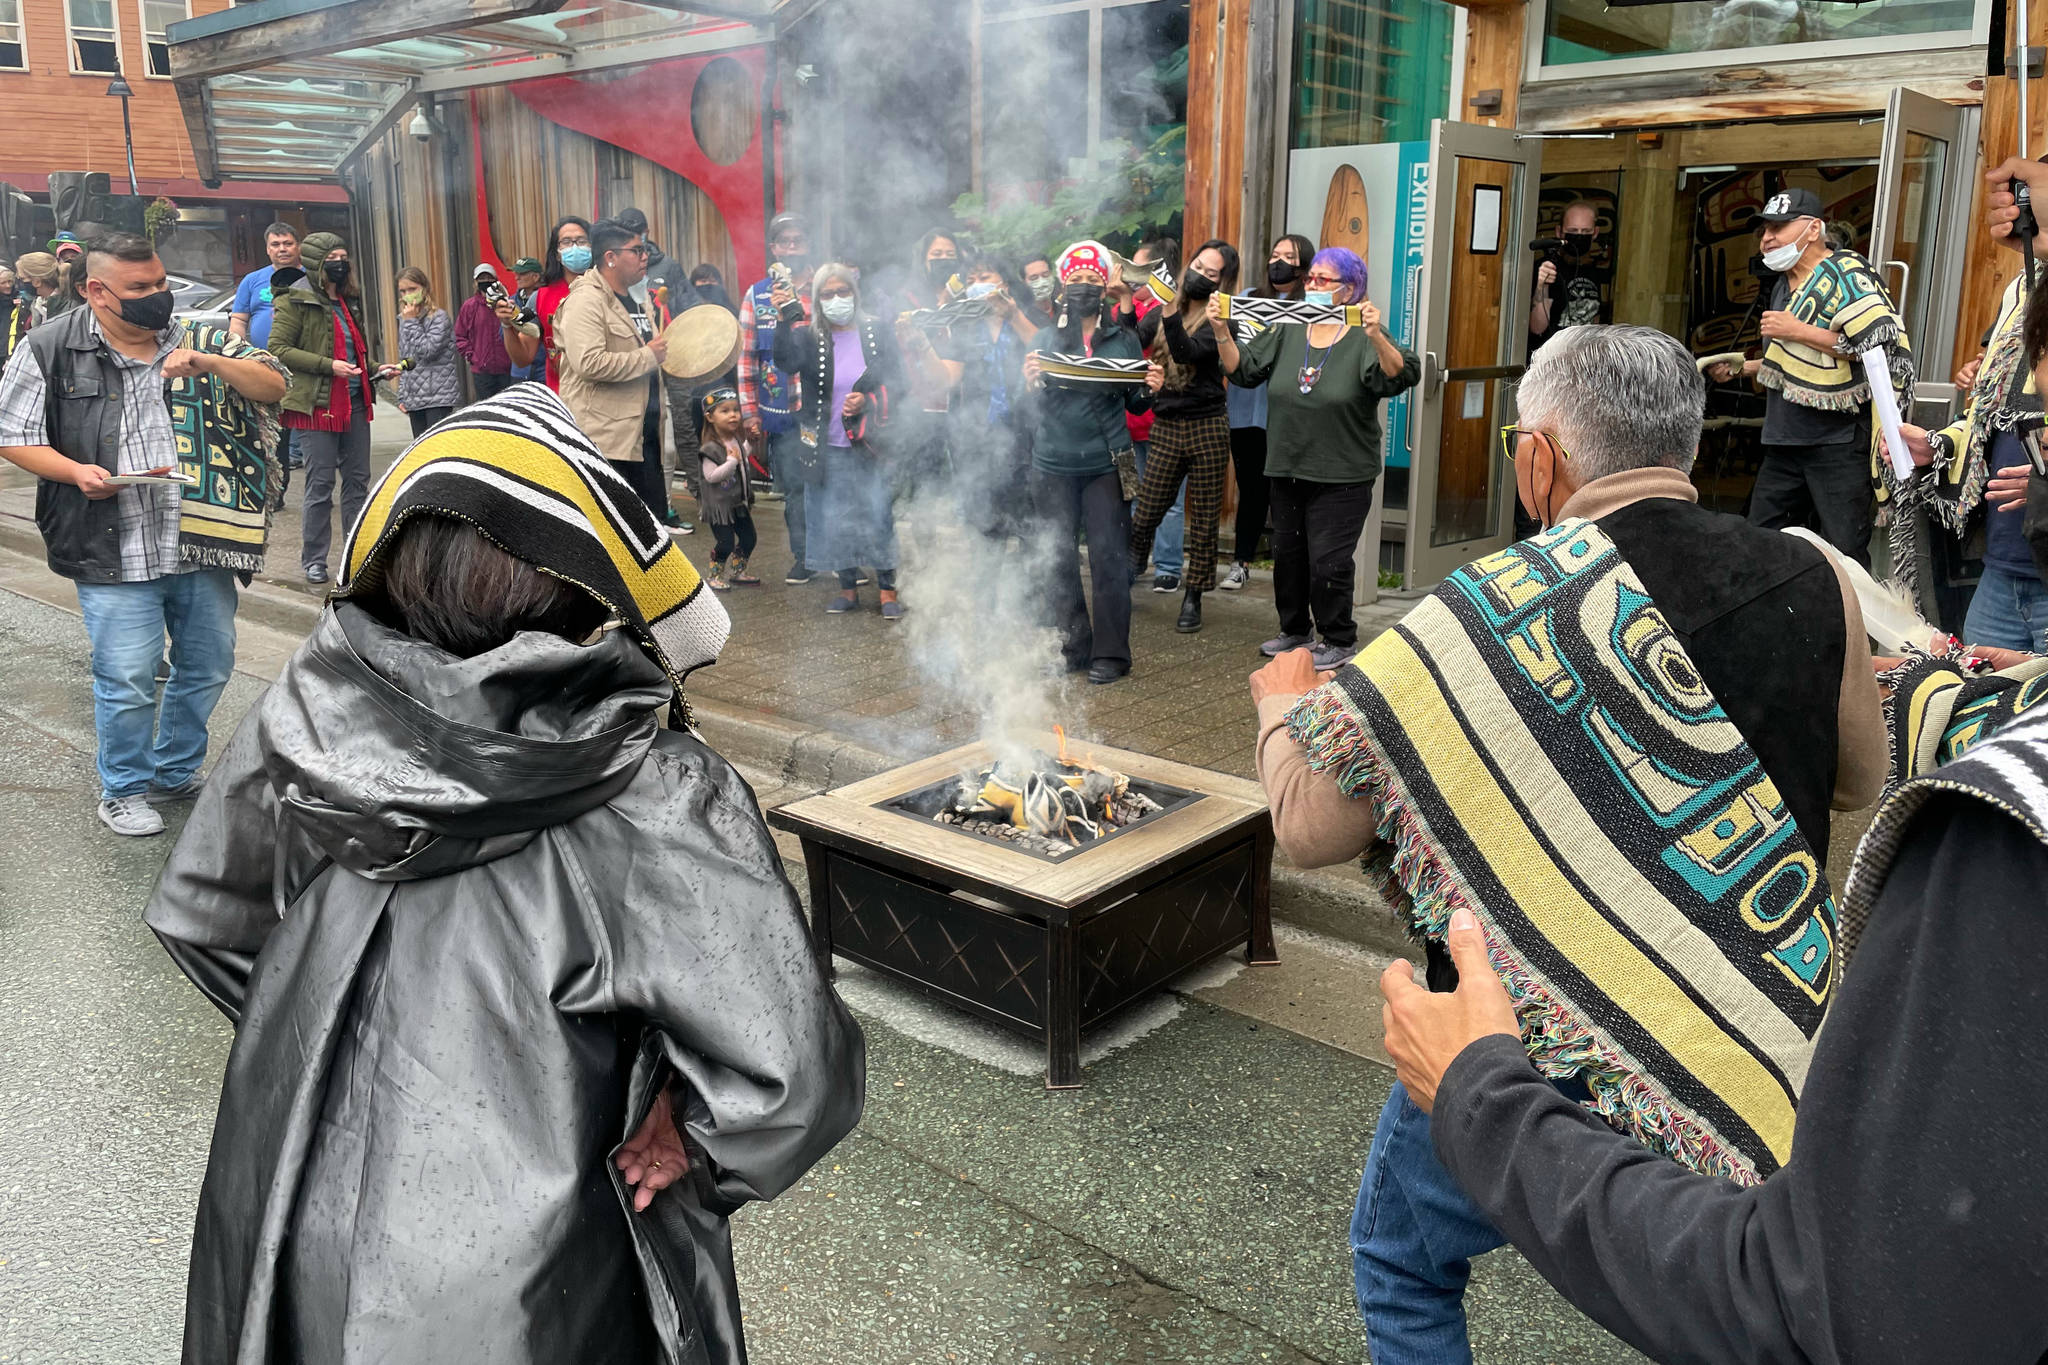 Participants burn an example of a commercial garment that led to a now-settled intellectual property lawsuit in a ceremony commemorating the settlement with the fashion company on Friday, Aug. 13, 2021. (Michael S. Lockett / Juneau Empire)